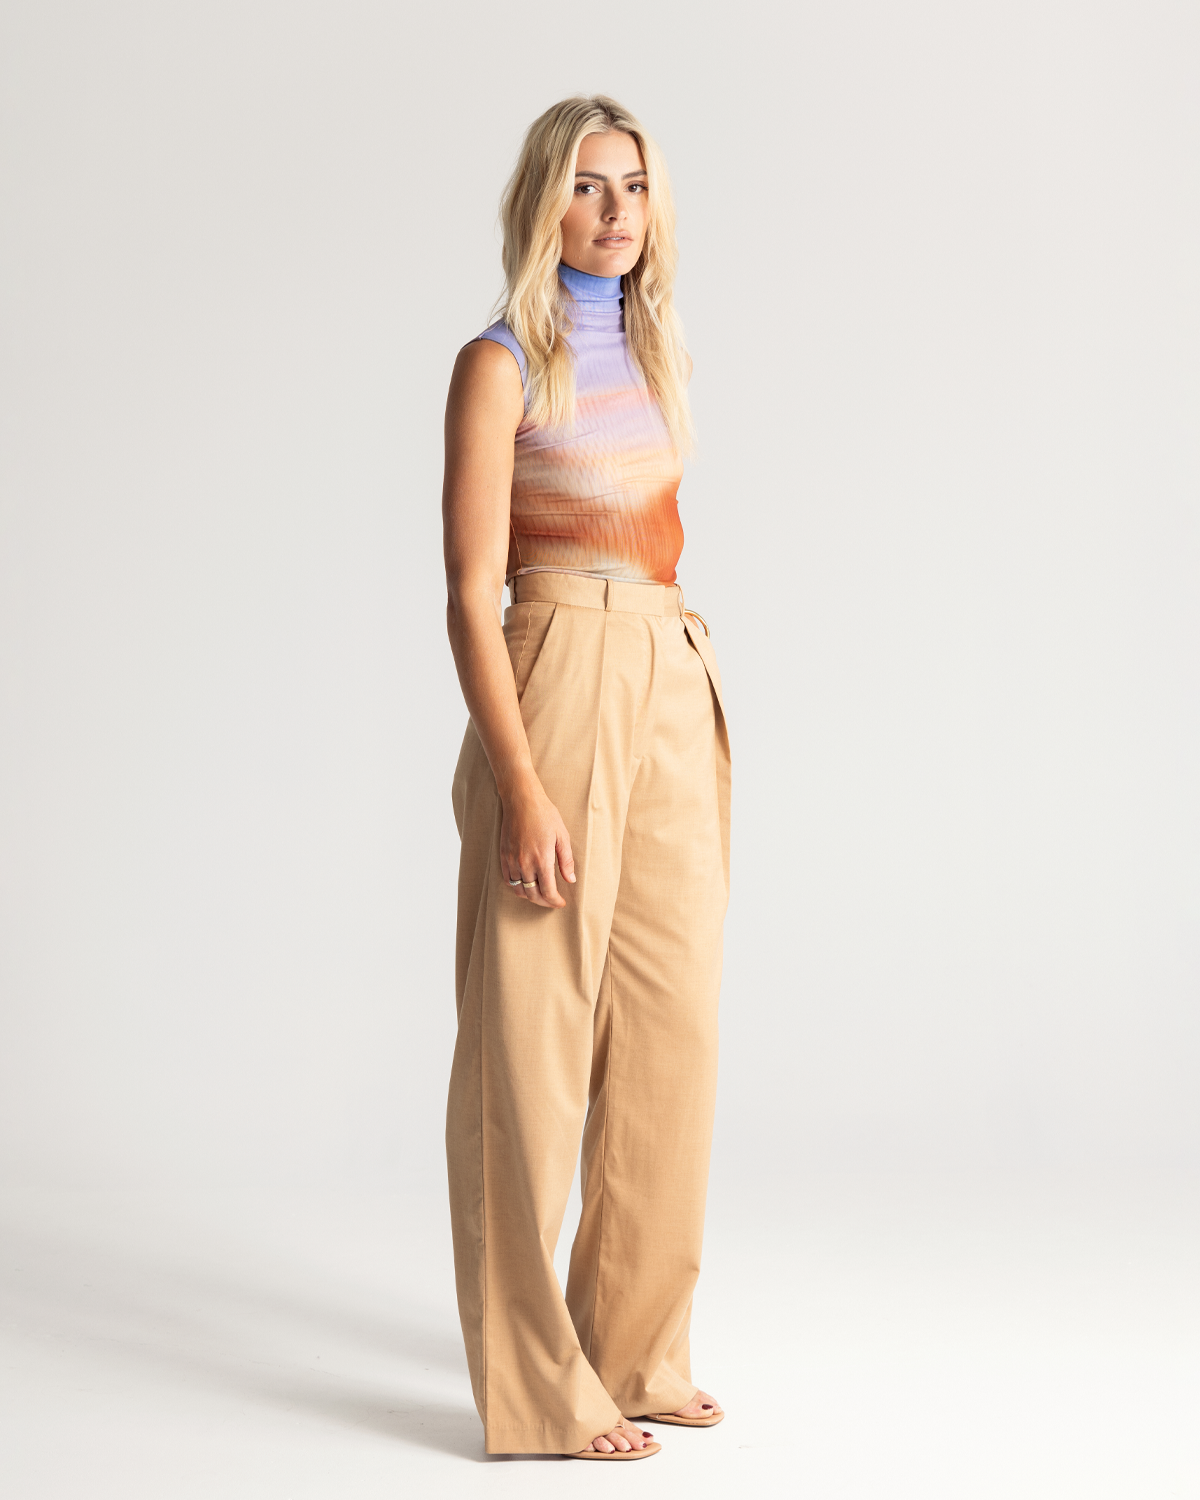 The Pleat Front Pant are an easy-wearing wide leg pant featuring a hidden clasp closure, pockets, and pleated detailing down the front, creating a subtle drape in the leg. They are crafted from a soft wool blend in Tan. Now available at Romy. 